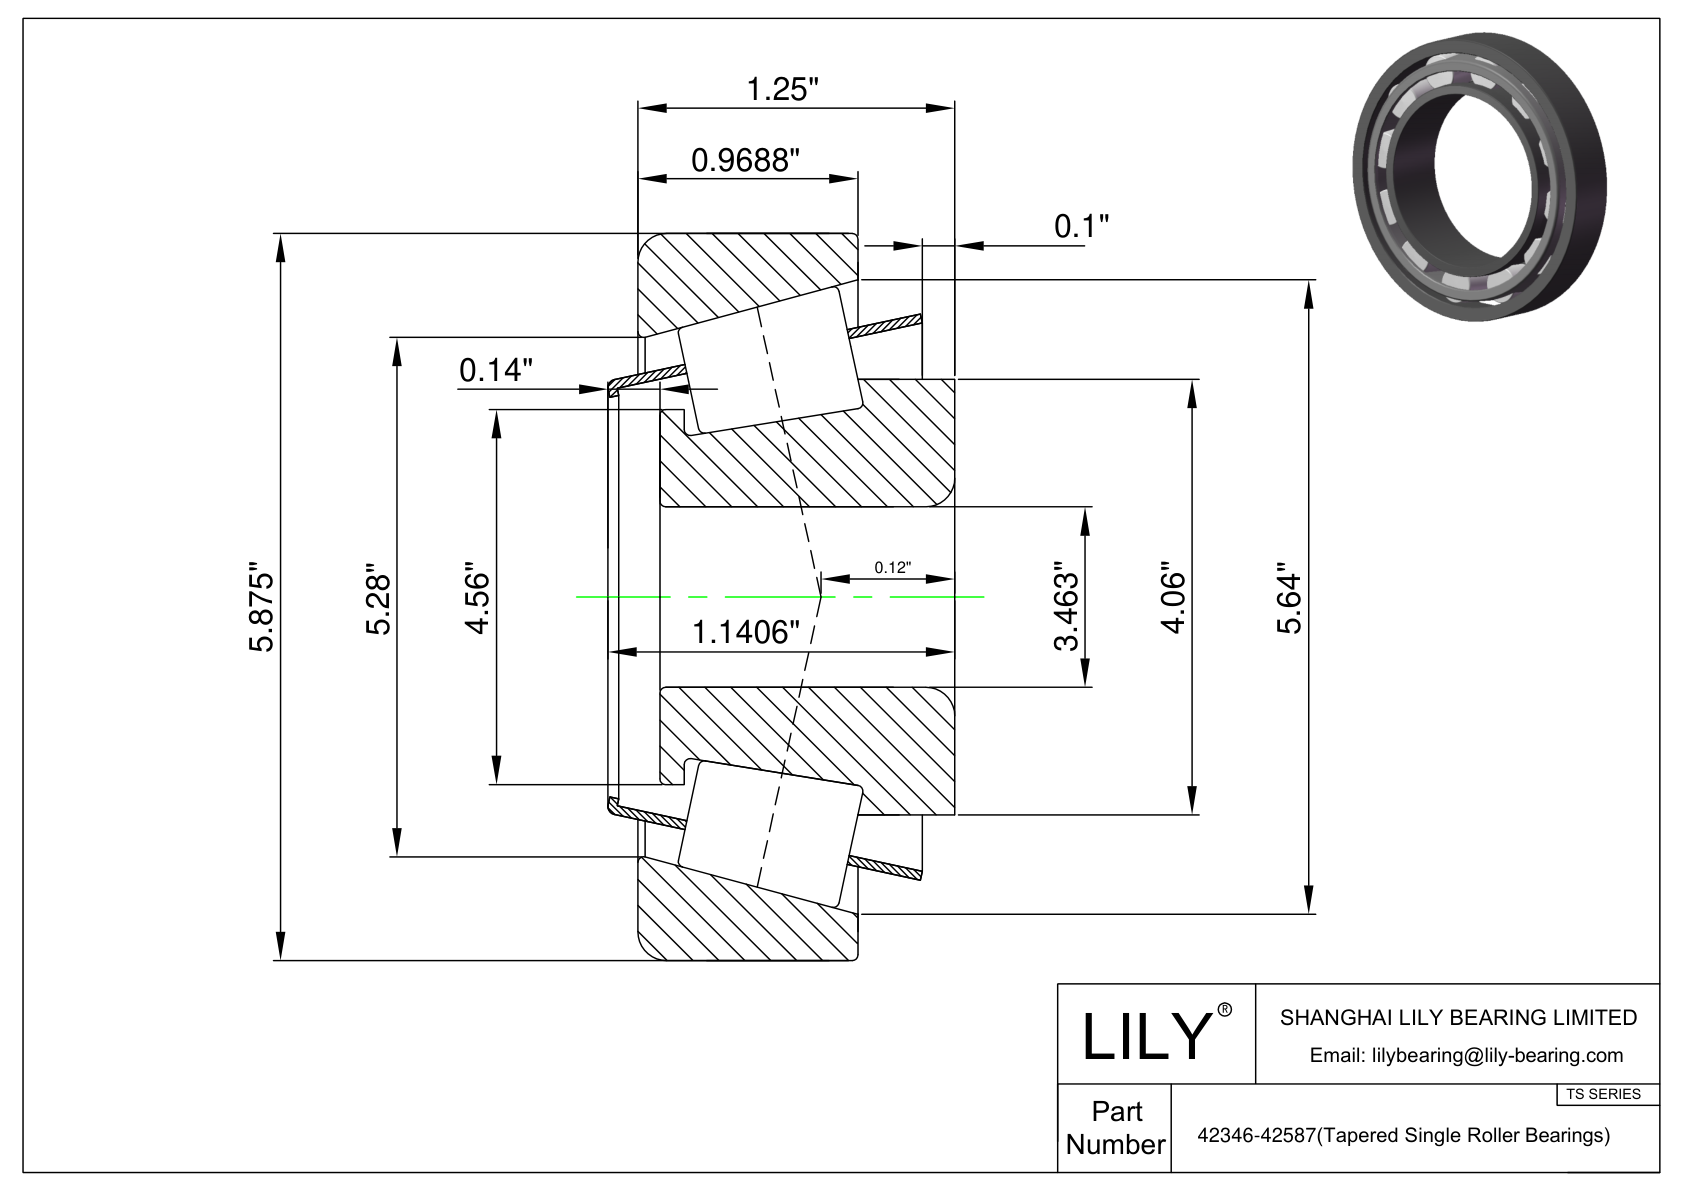 42346-42587 TS (Tapered Single Roller Bearings) (Imperial) cad drawing